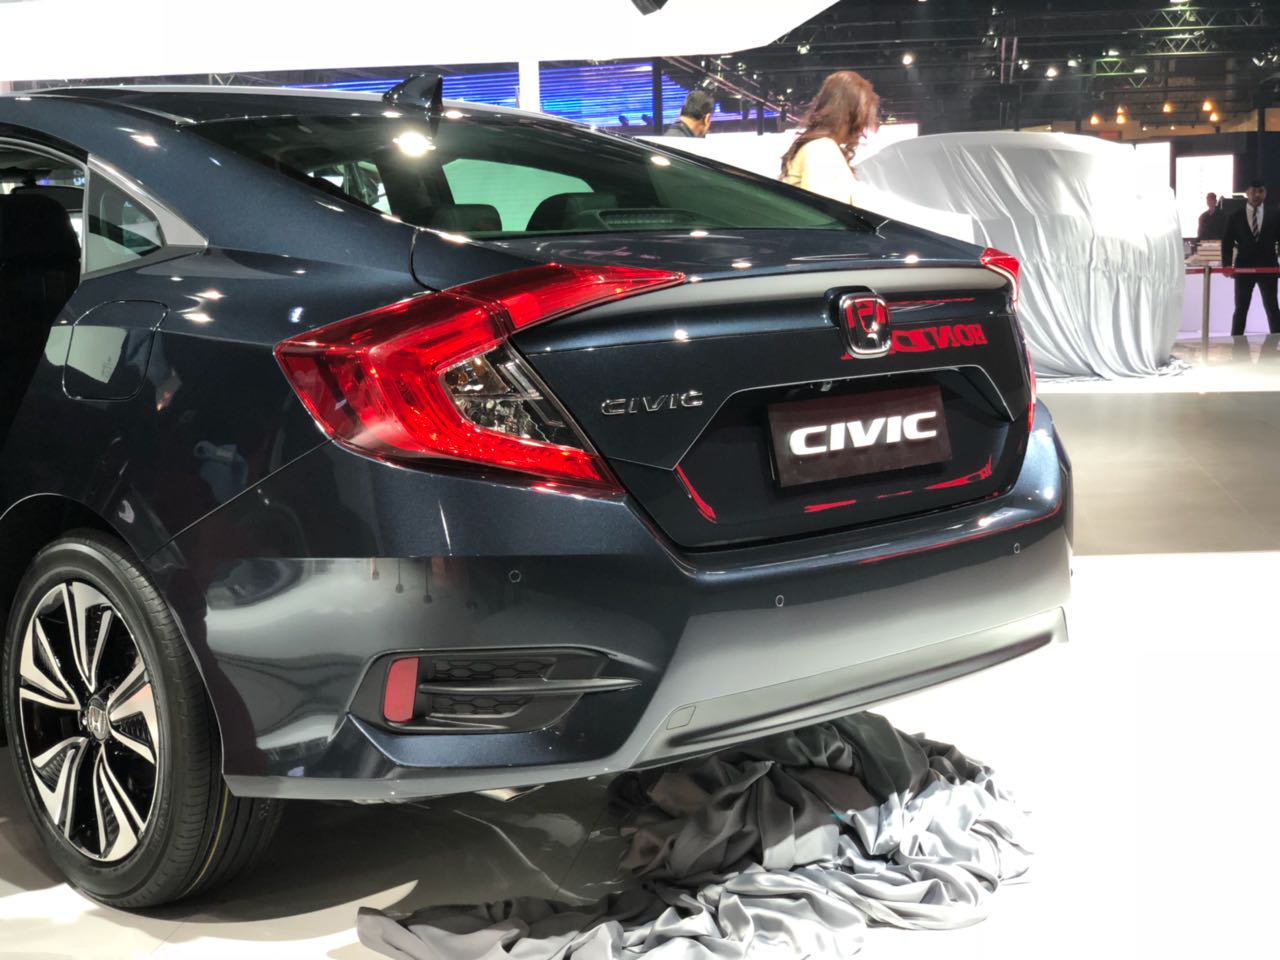 All New Honda Civic Unveiled at Auto Expo 2018! - Images & Details